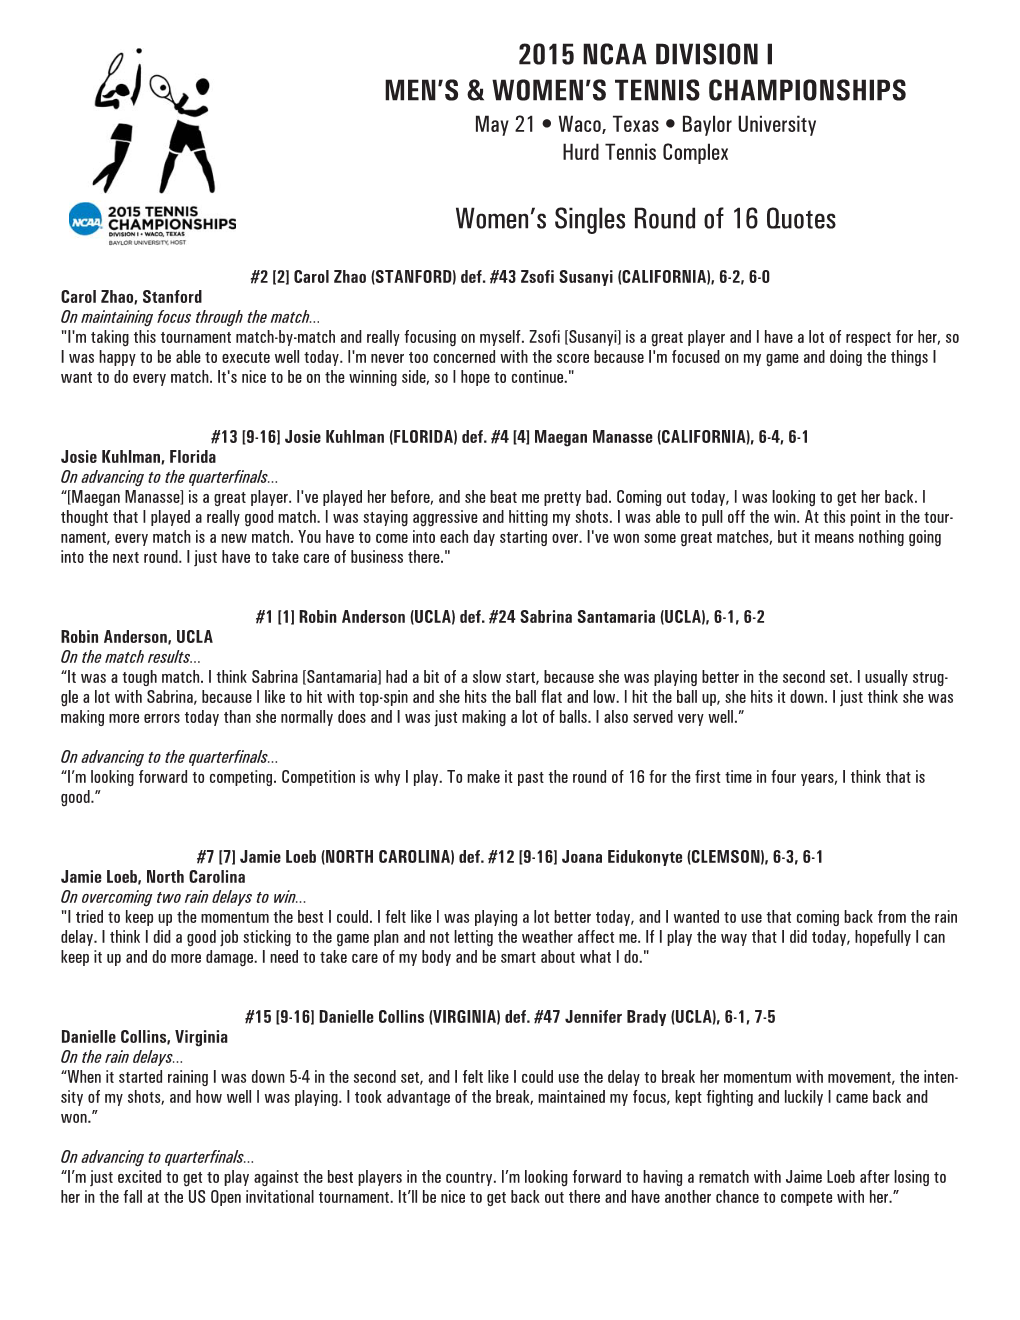 Women's Singles Round of 16 Quotes Layout 1